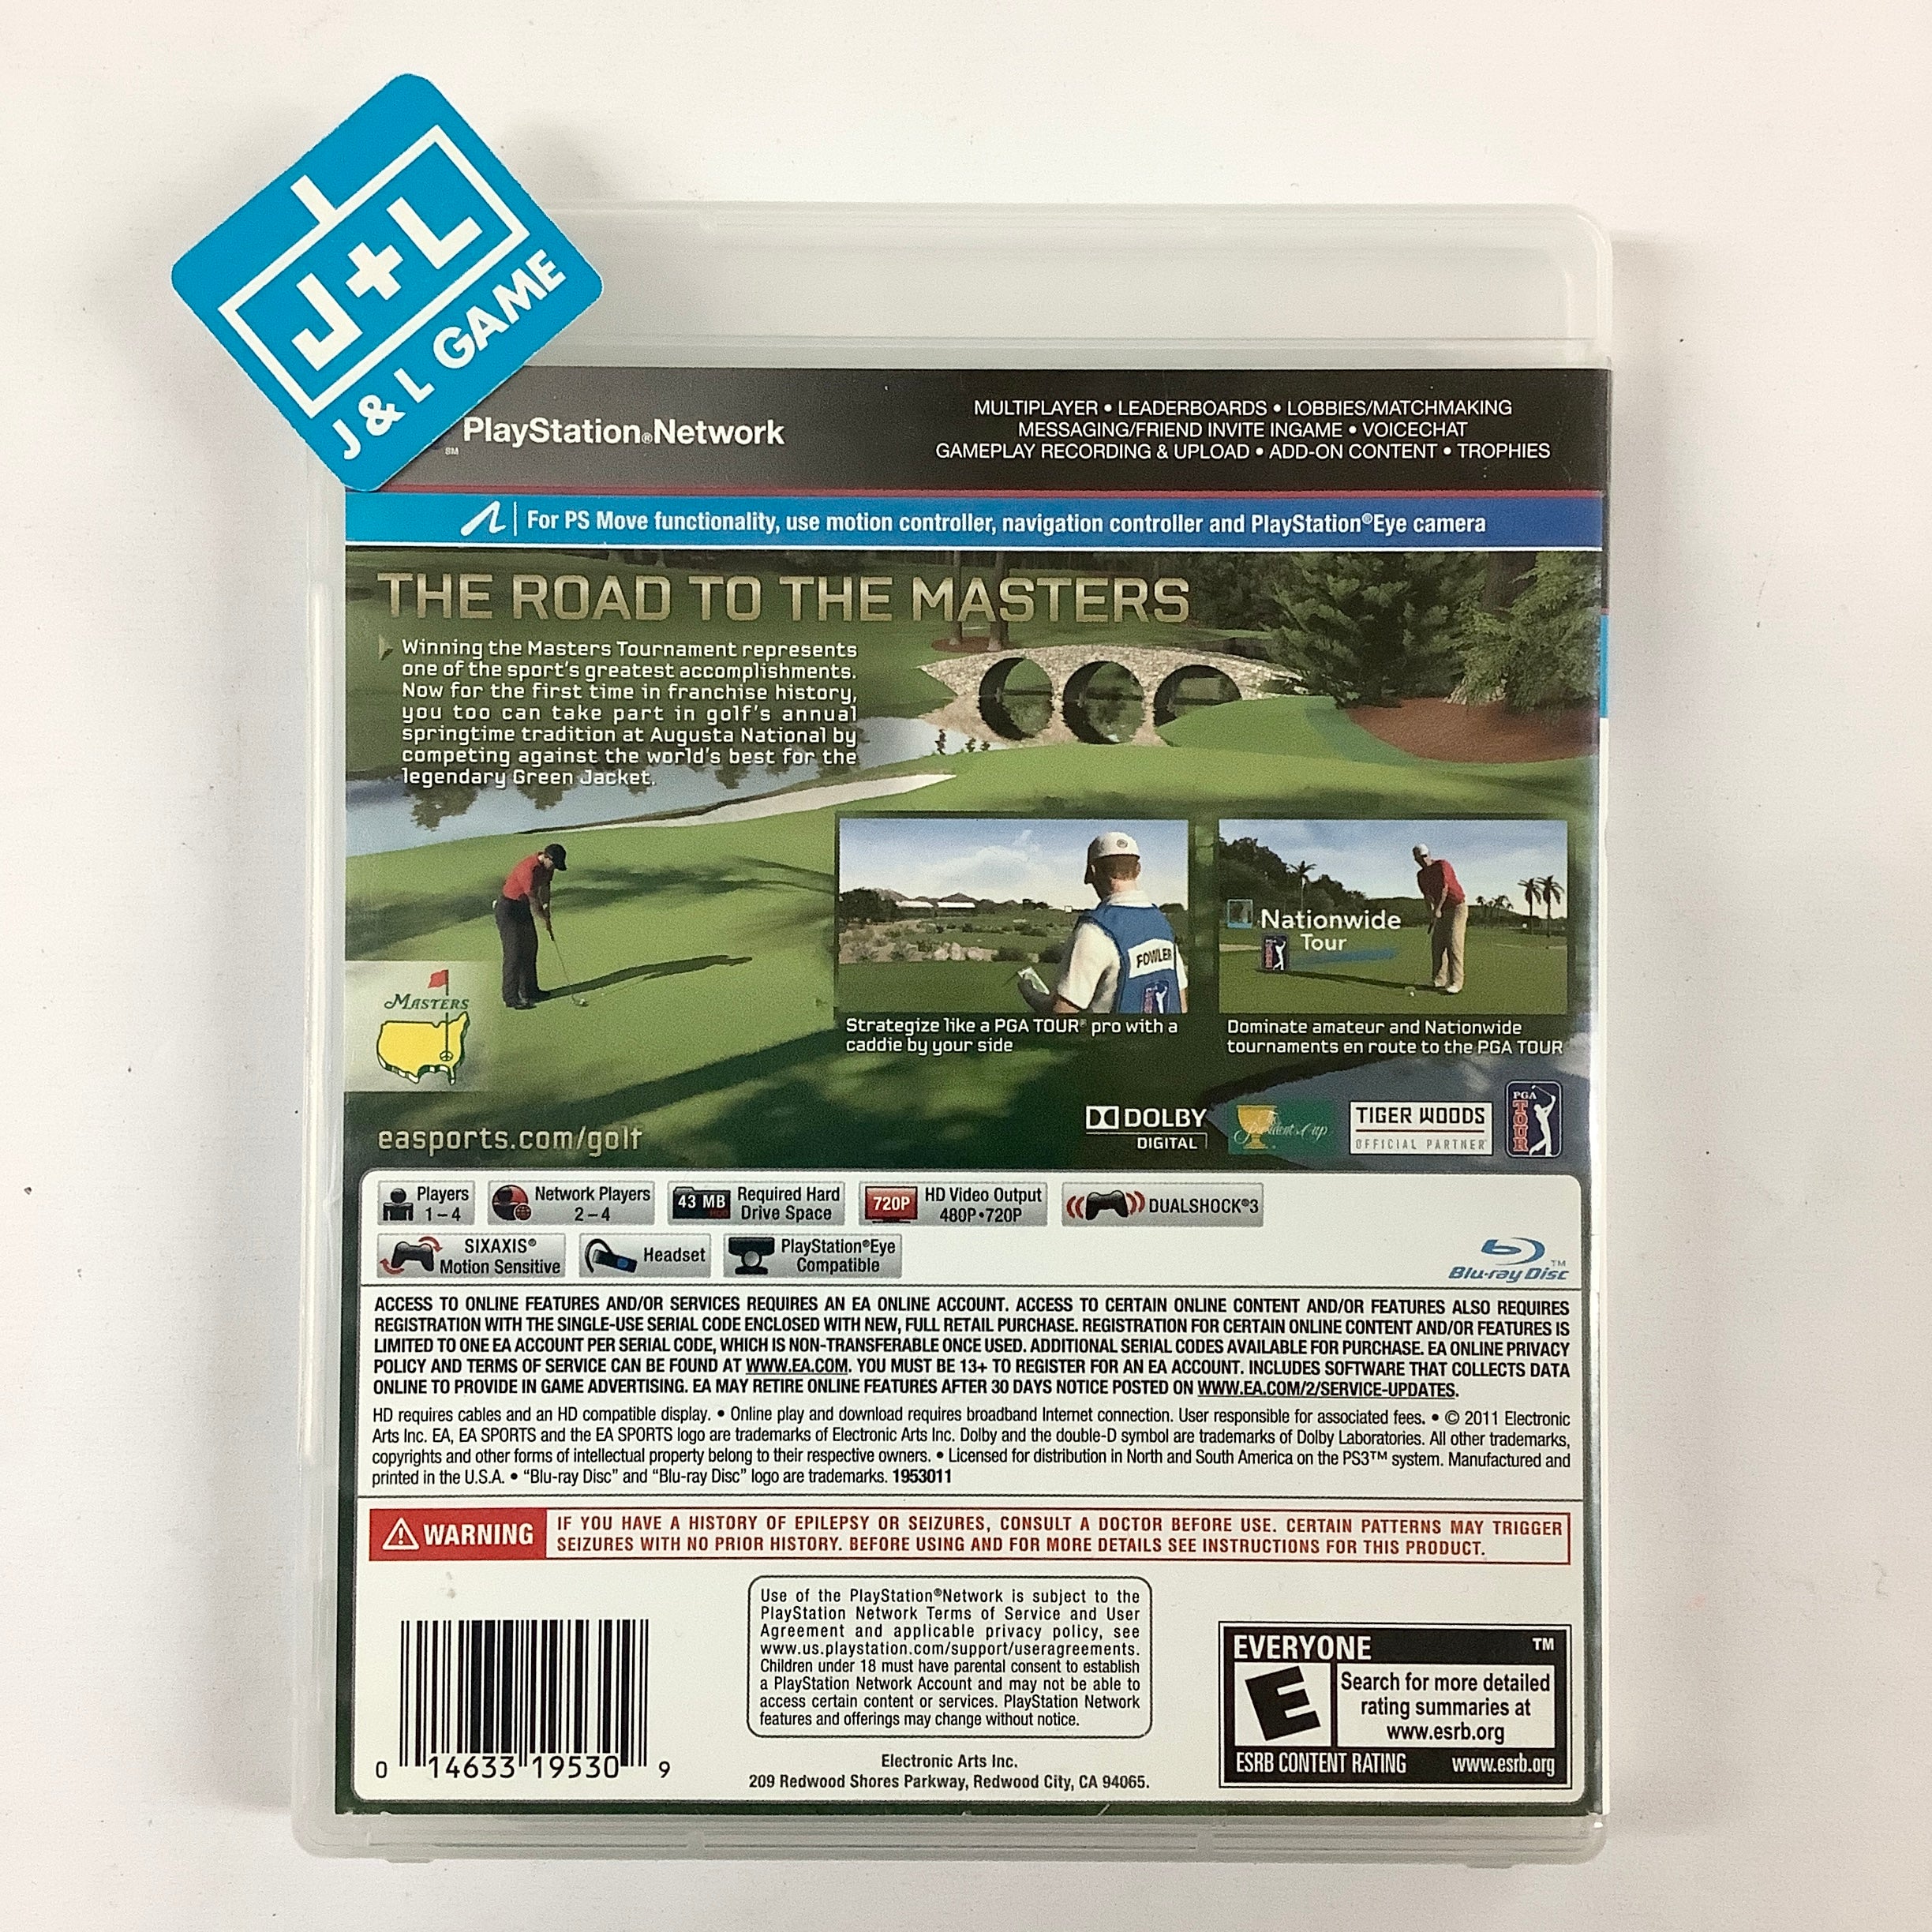 Tiger Woods PGA Tour 12: The Masters - (PS3) PlayStation 3 [Pre-Owned] Video Games Electronic Arts   